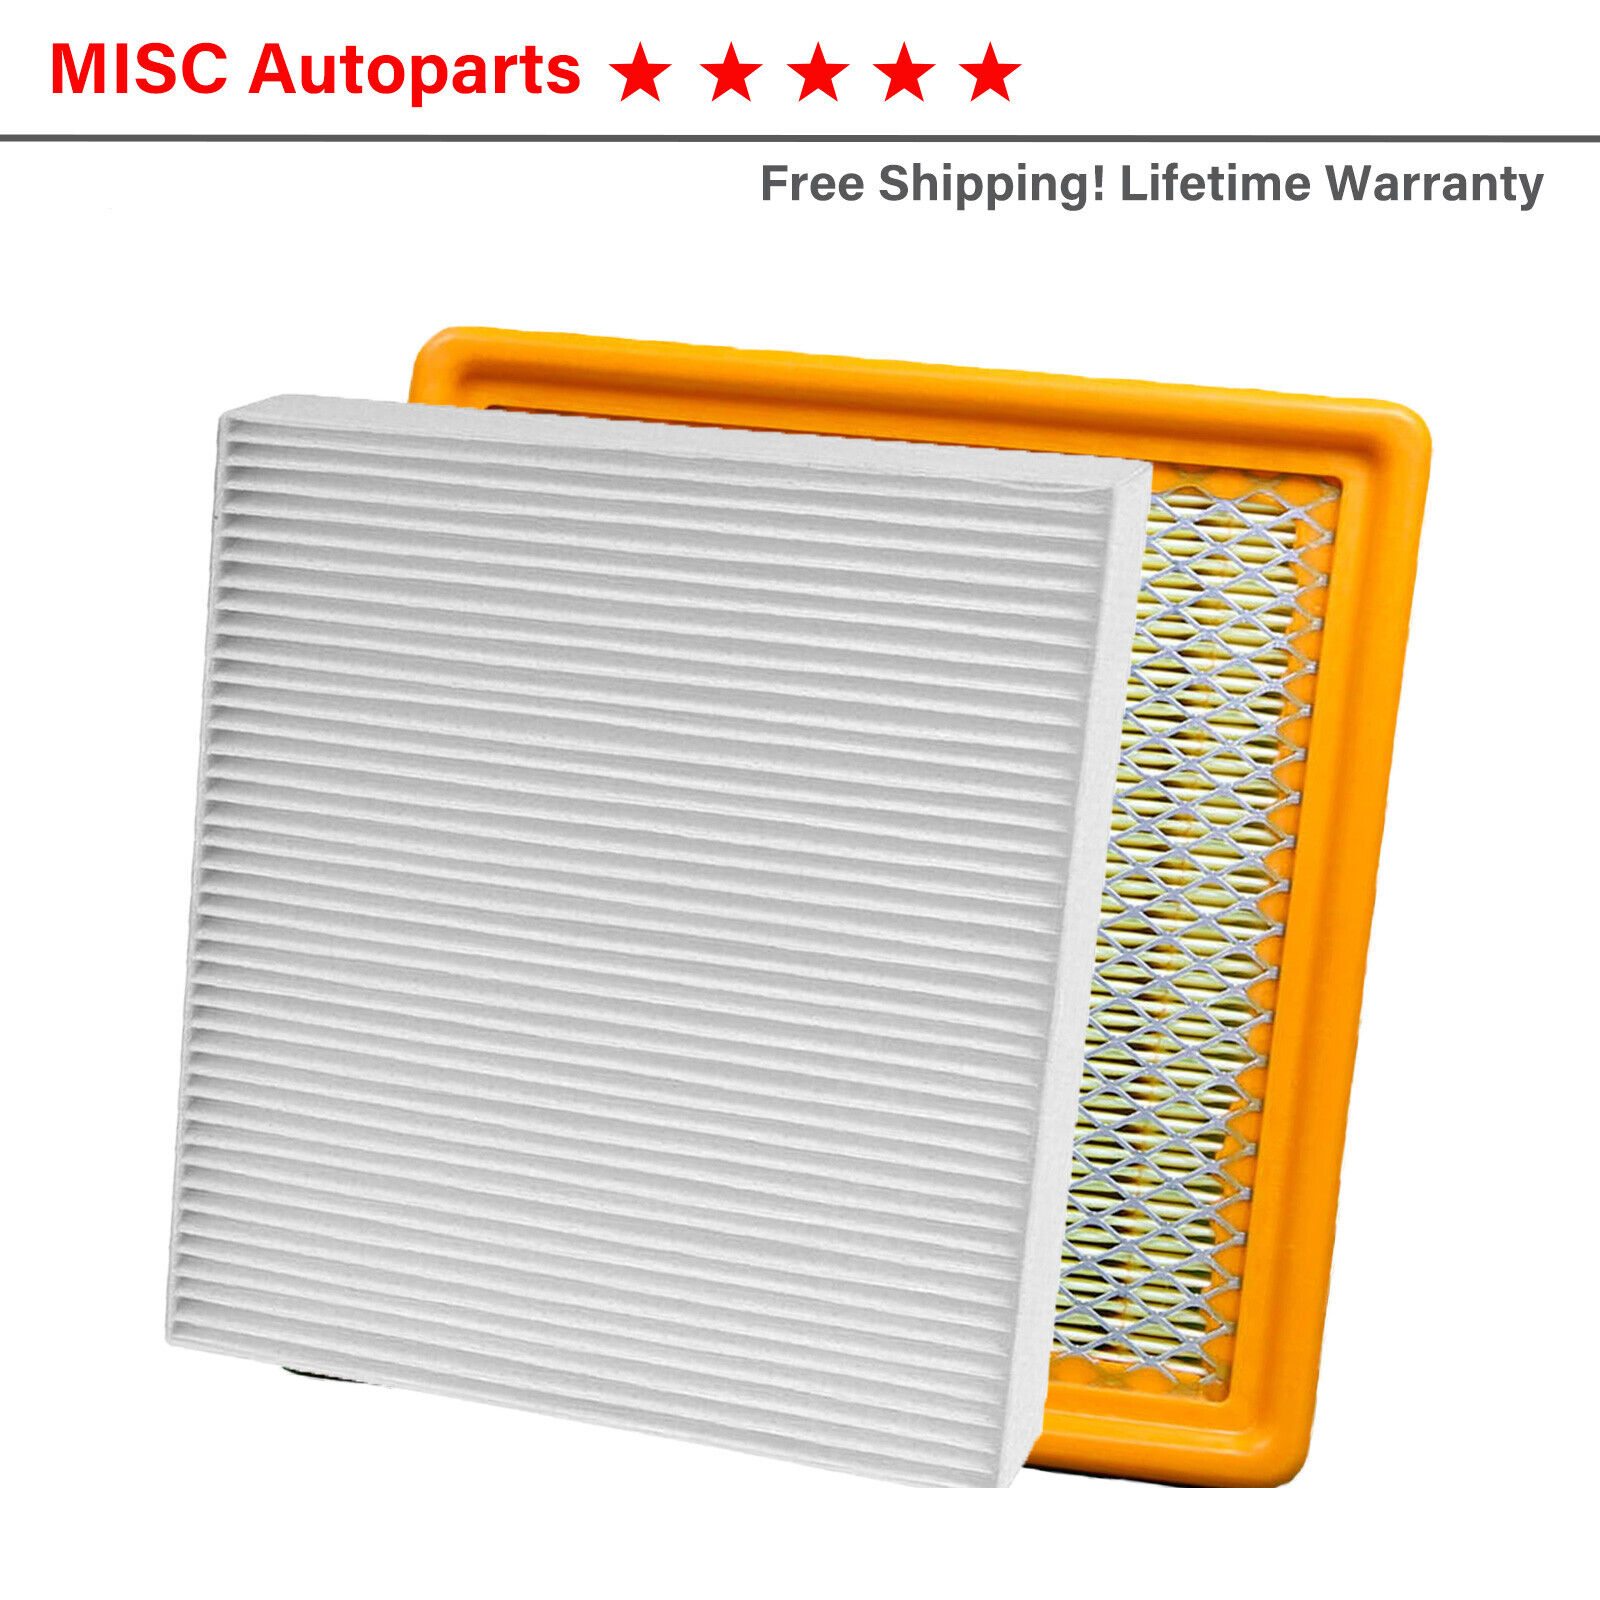 Engine & Cabin Air Filter for 2014-2016 CADILLAC ELR 1.4L A6169 FC36154C